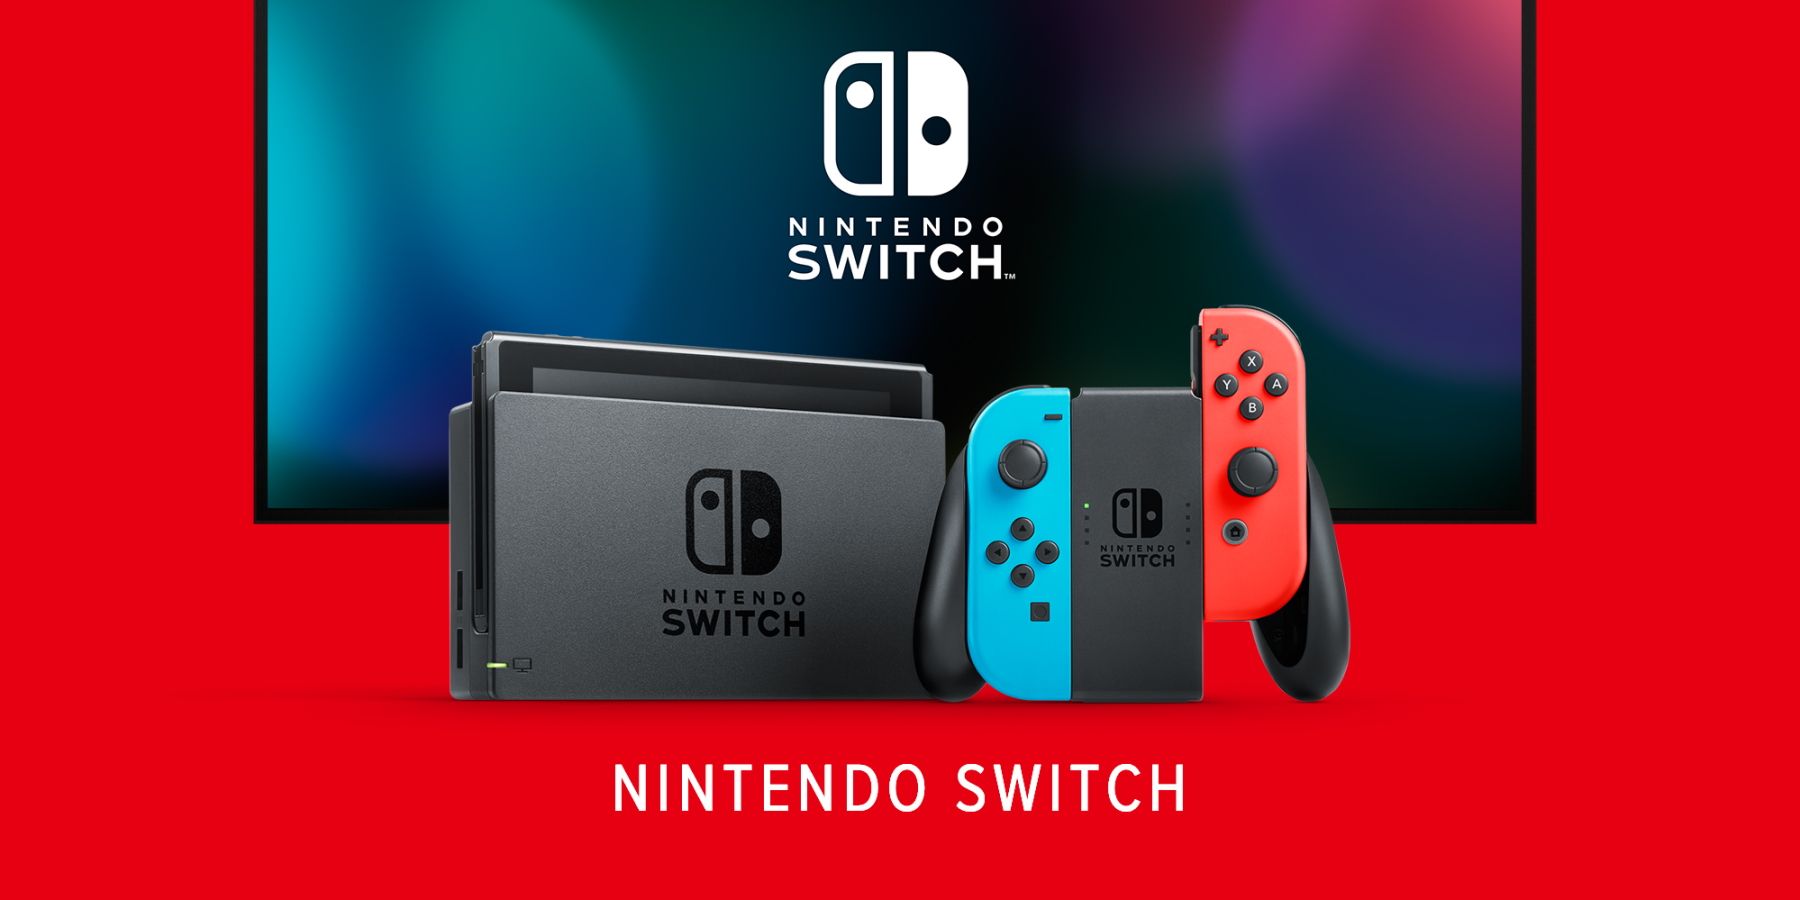 A promotional image for the Nintendo Switch showing a TV, the console in the dock, and the JoyCons.